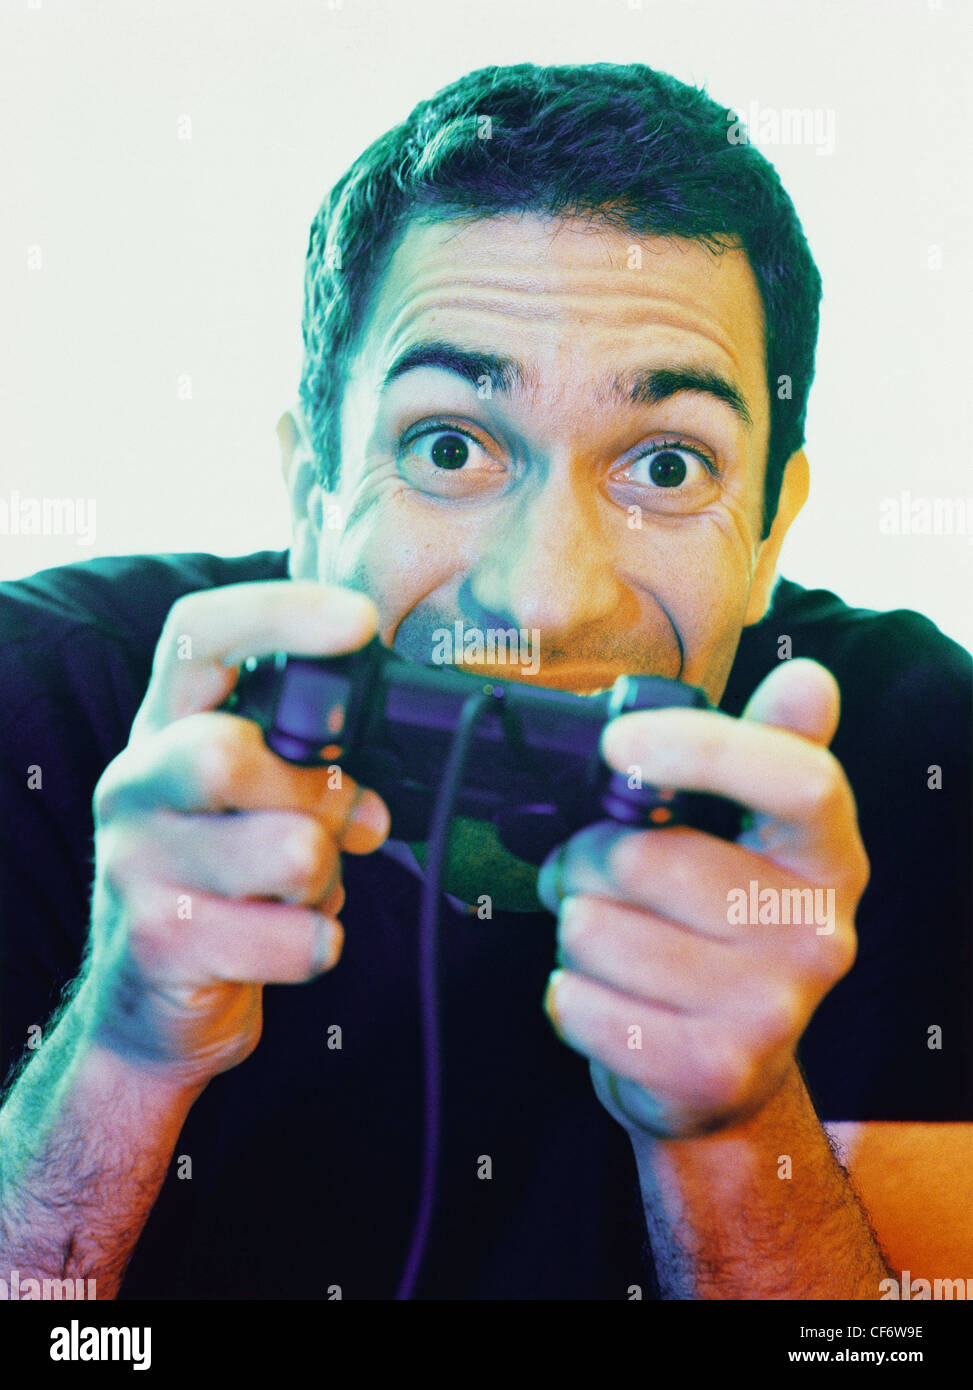 Male short brown hair playing playstation video game controls up to face eyes wide open posessed expression on face Stock Photo